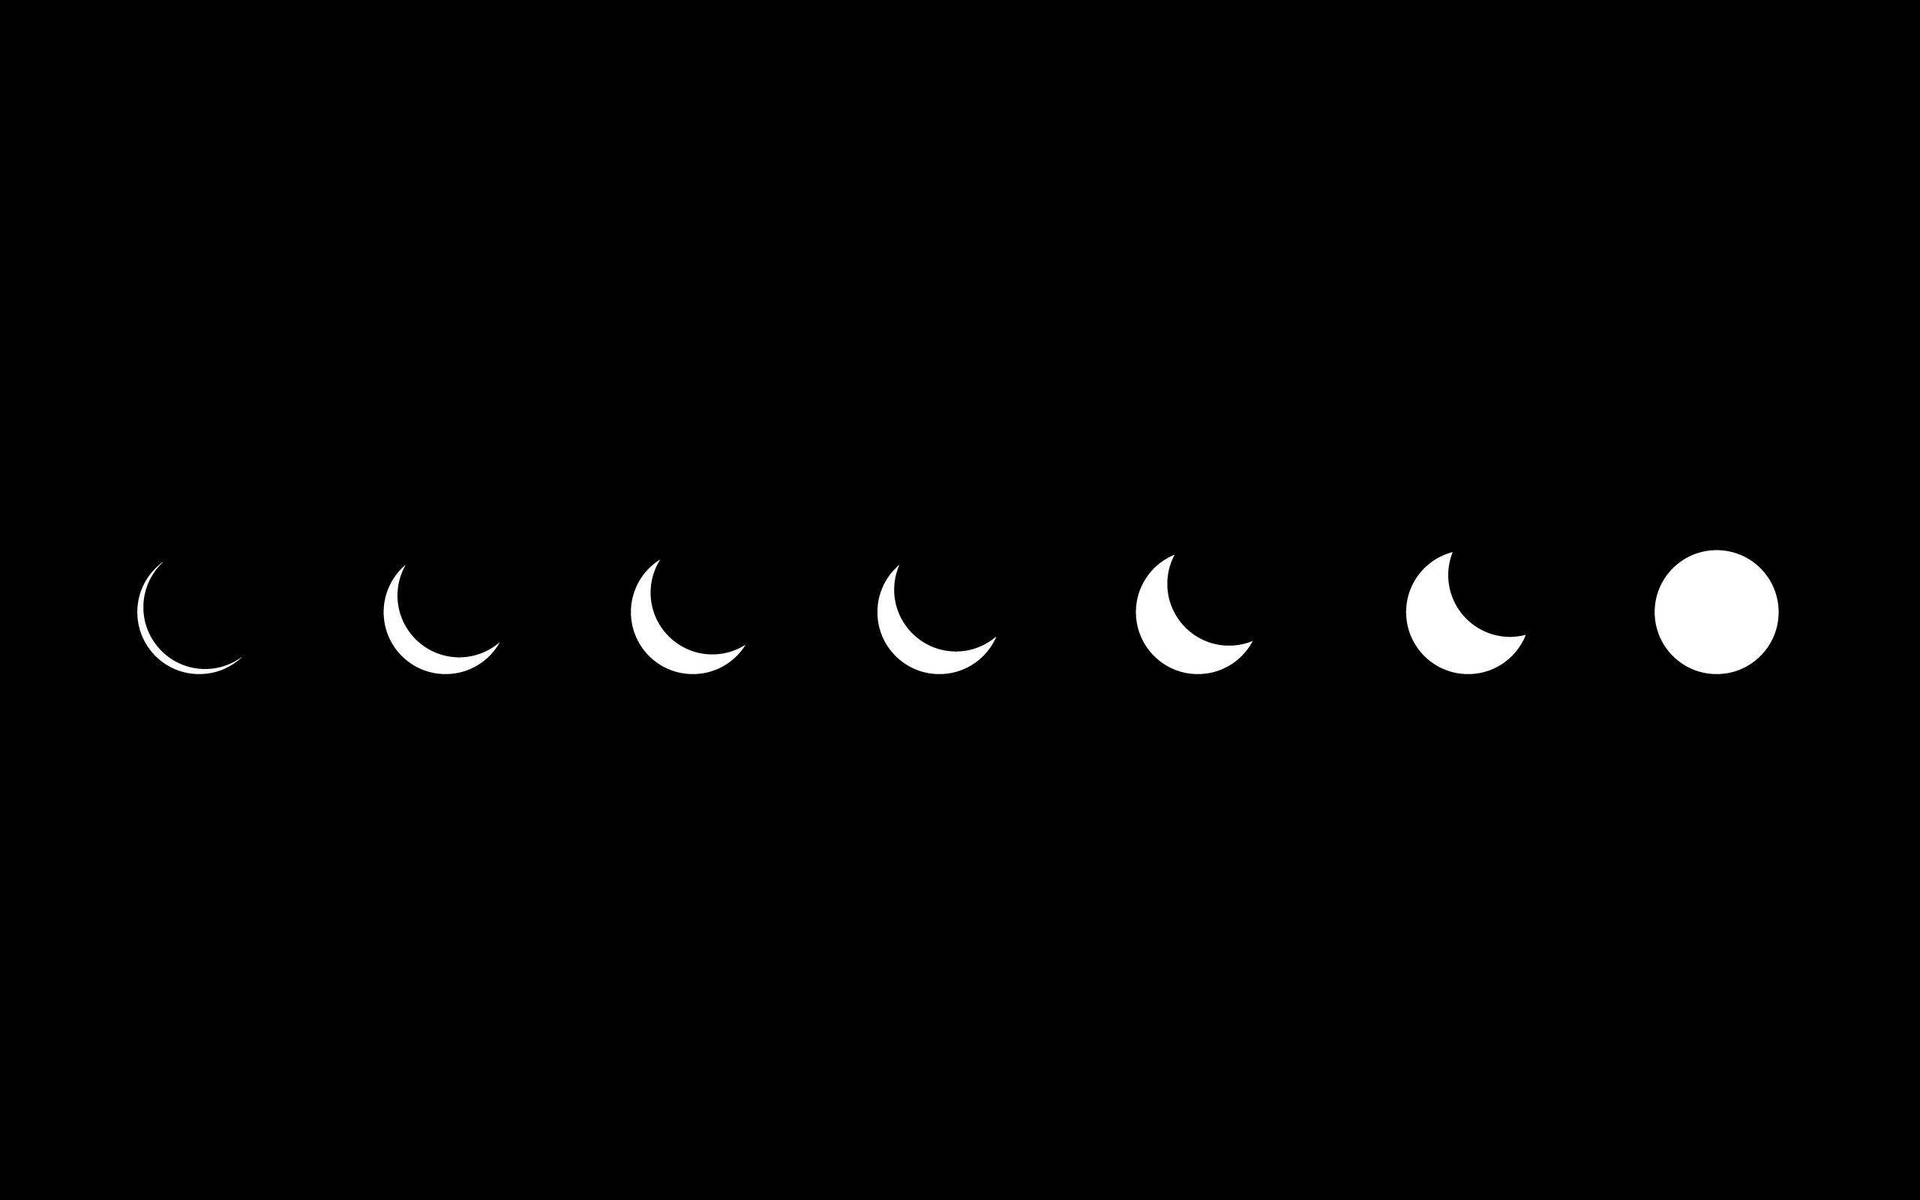 Dark Aesthetic Phases Of The Moon For Computer